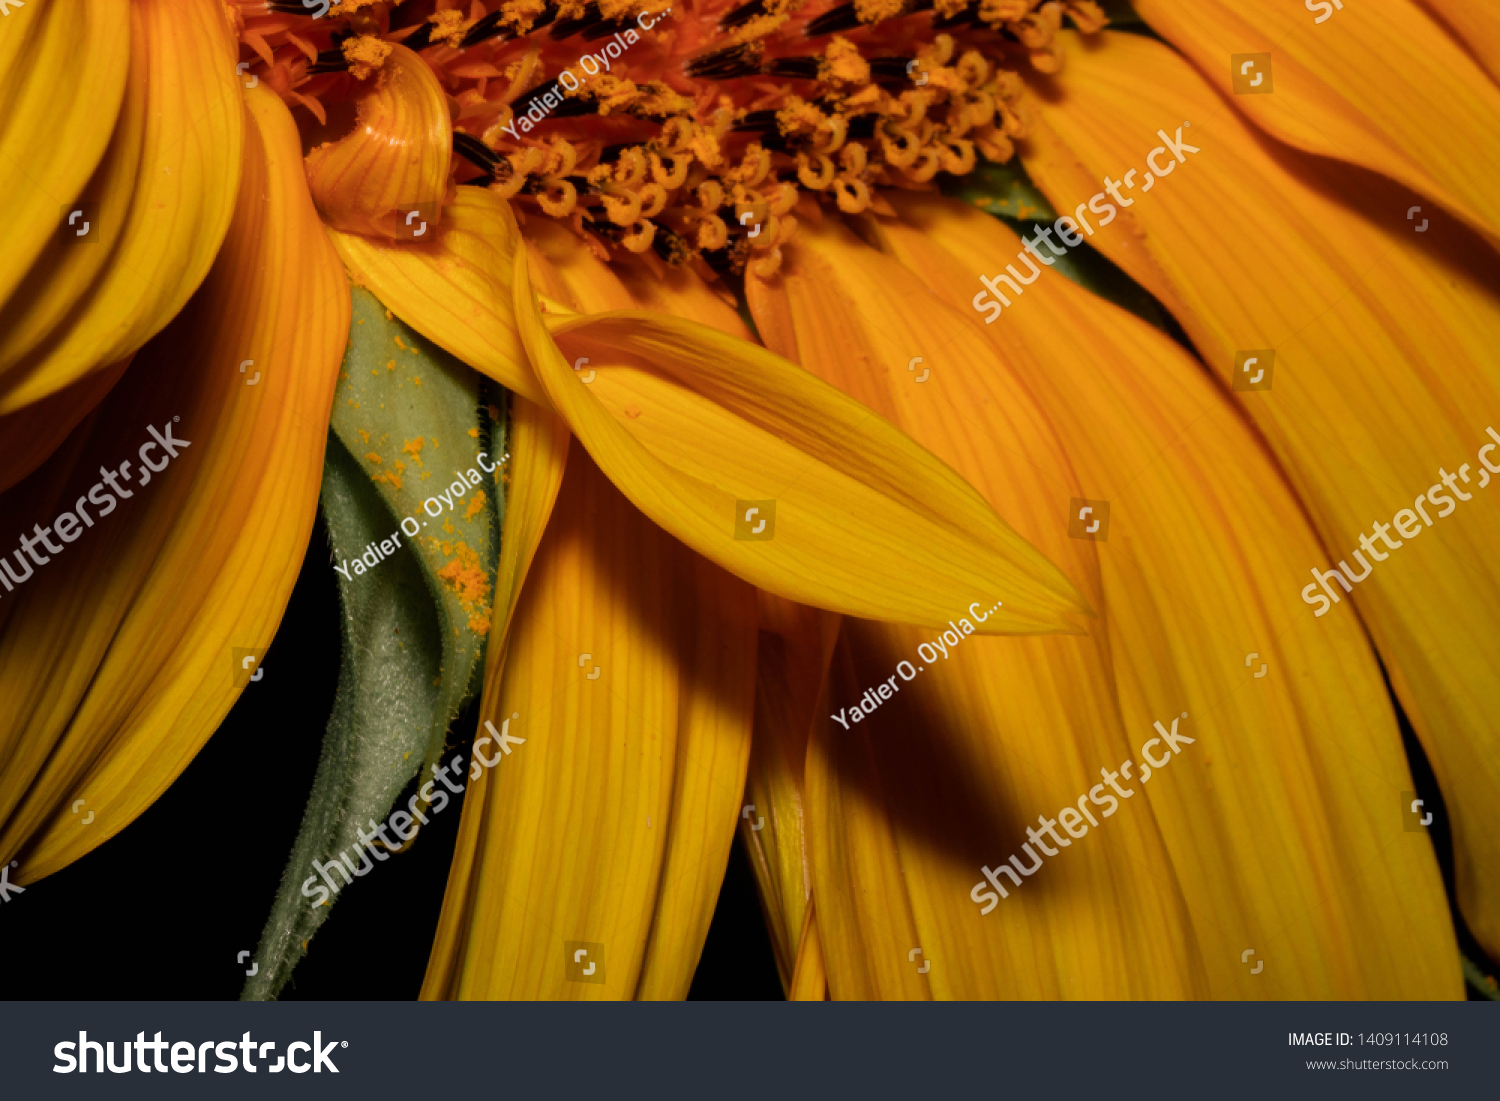 Different perspectives of a beautiful sunflower. #1409114108